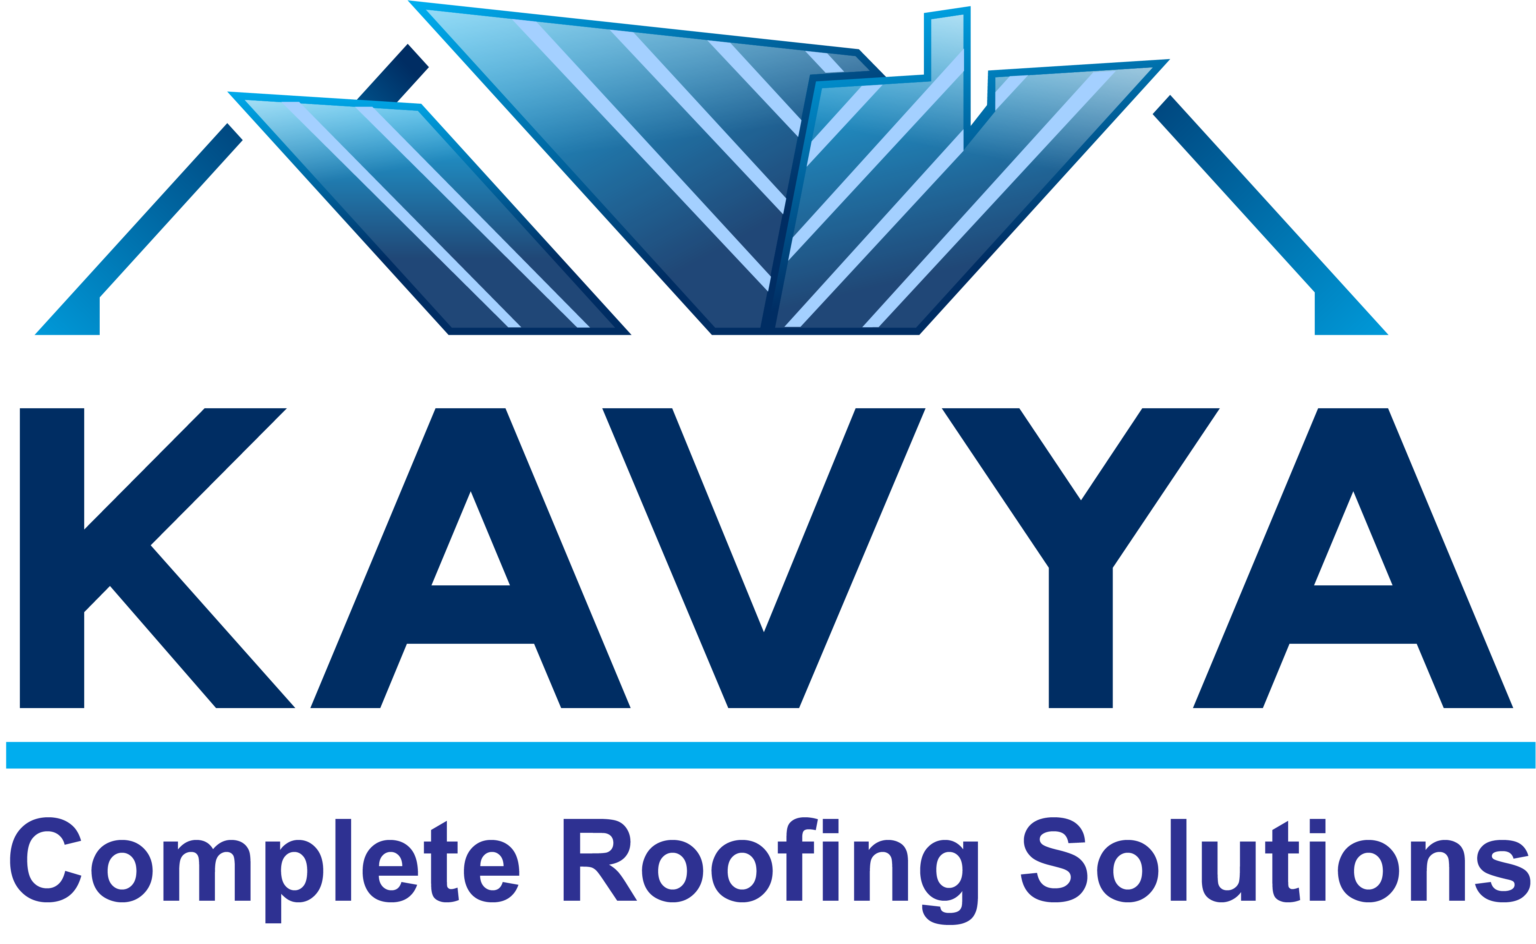 Kavya Roofing Solutions